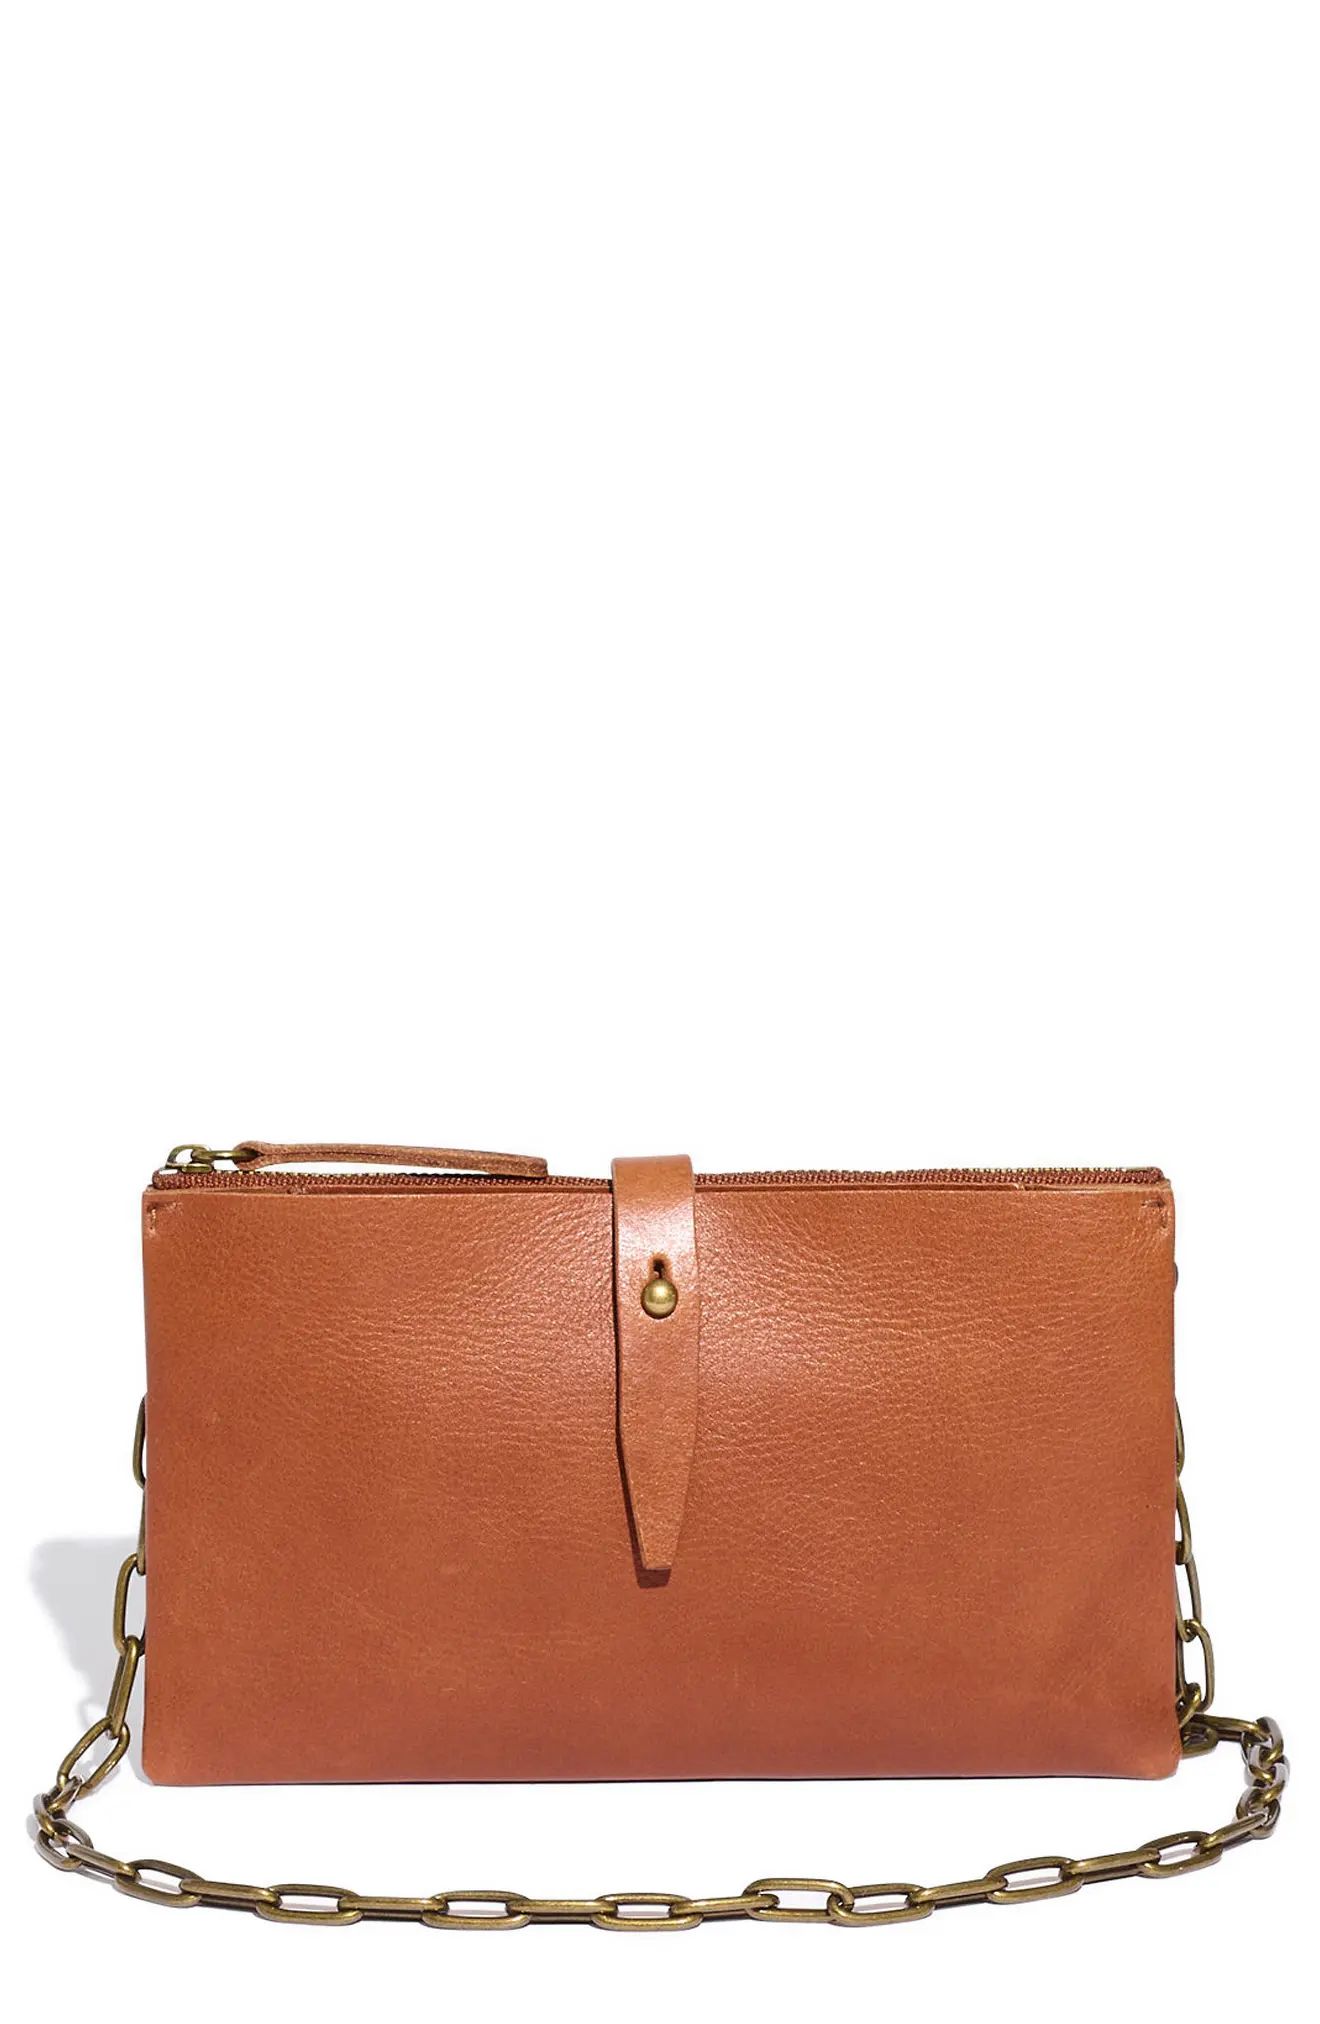 Madewell The Transport Accordion Crossbody Bag in English Saddle at Nordstrom | Nordstrom